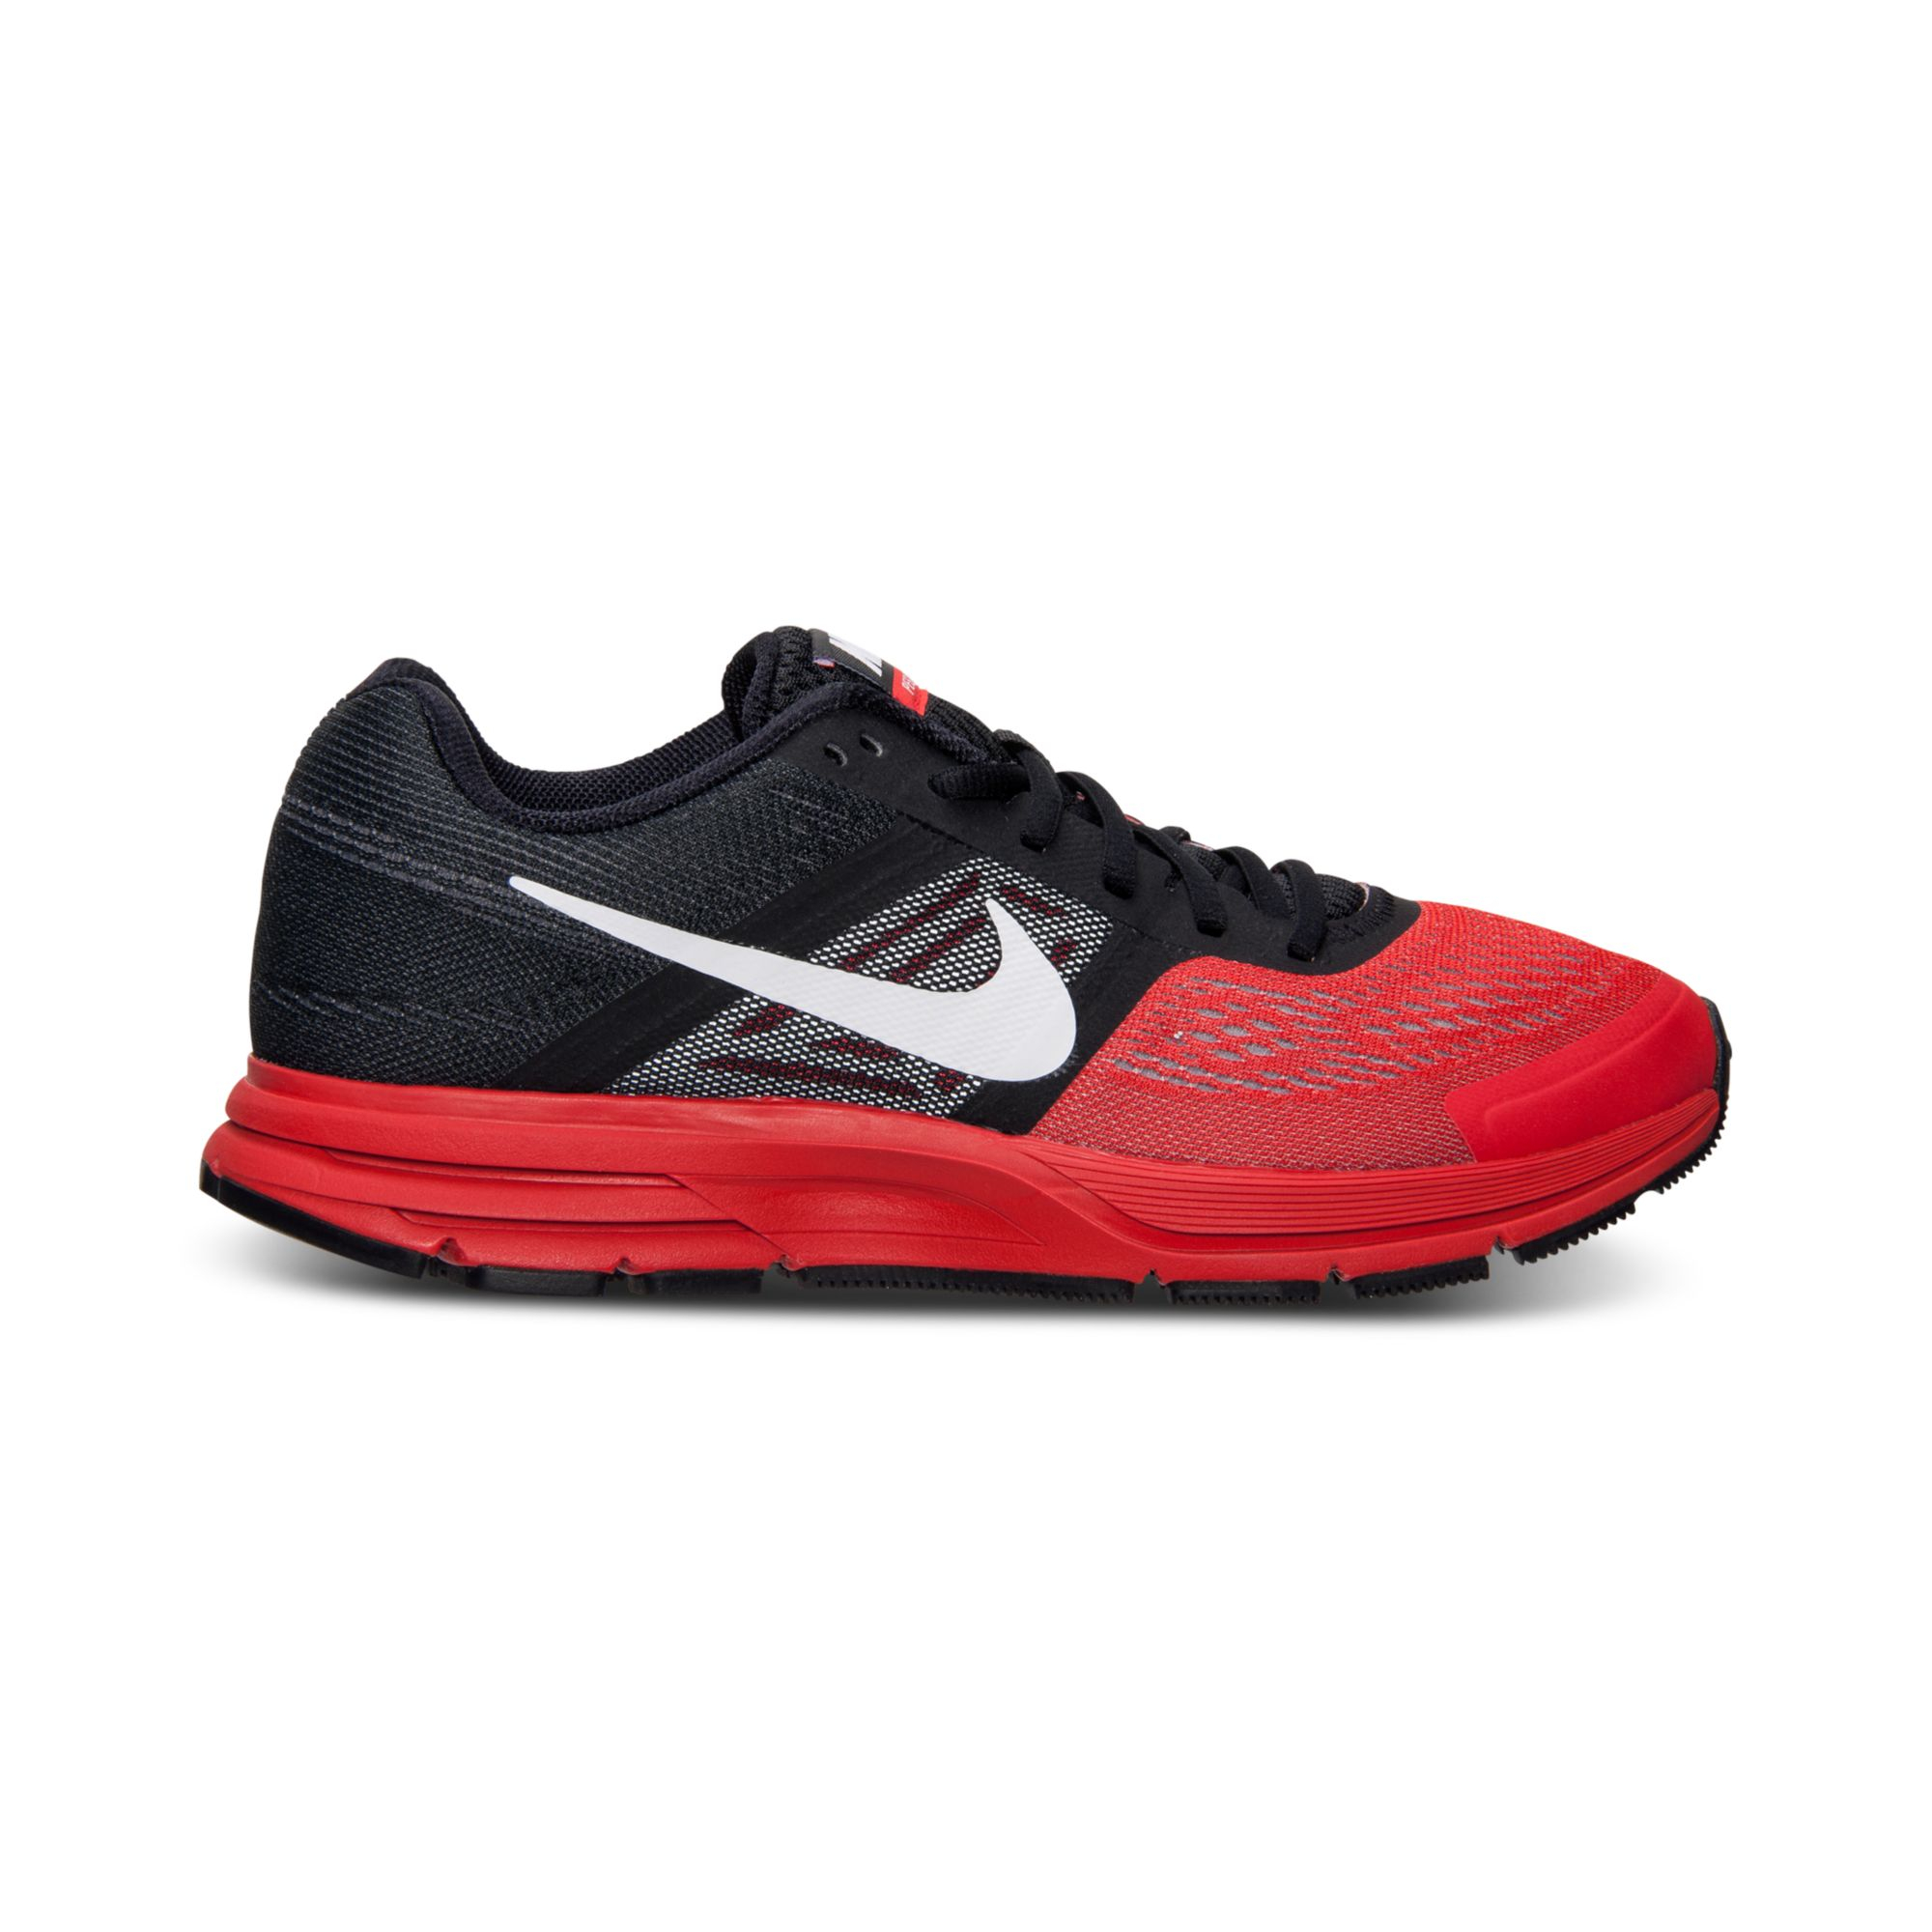 Lyst - Nike Mens Air Pegasus 30 Running Shoes From Finish Line in Black ...